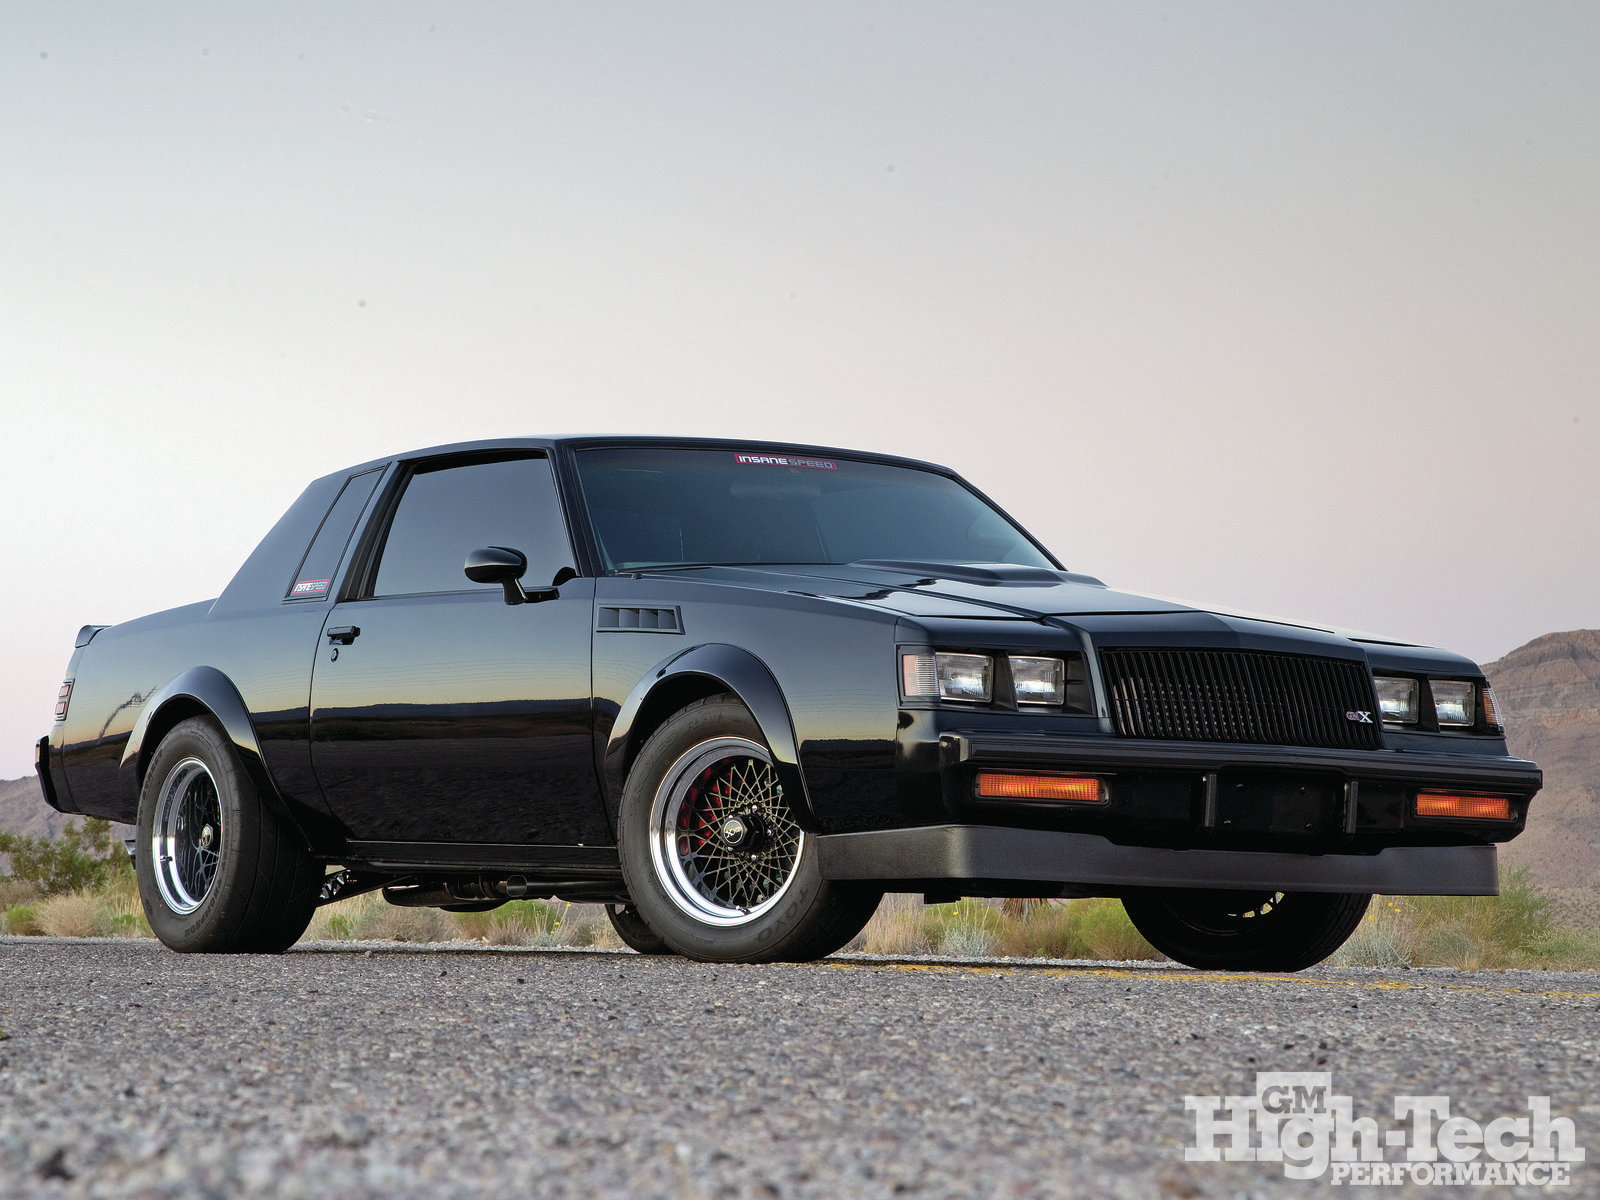 Does anyone enjoy the GNX as much as I do?